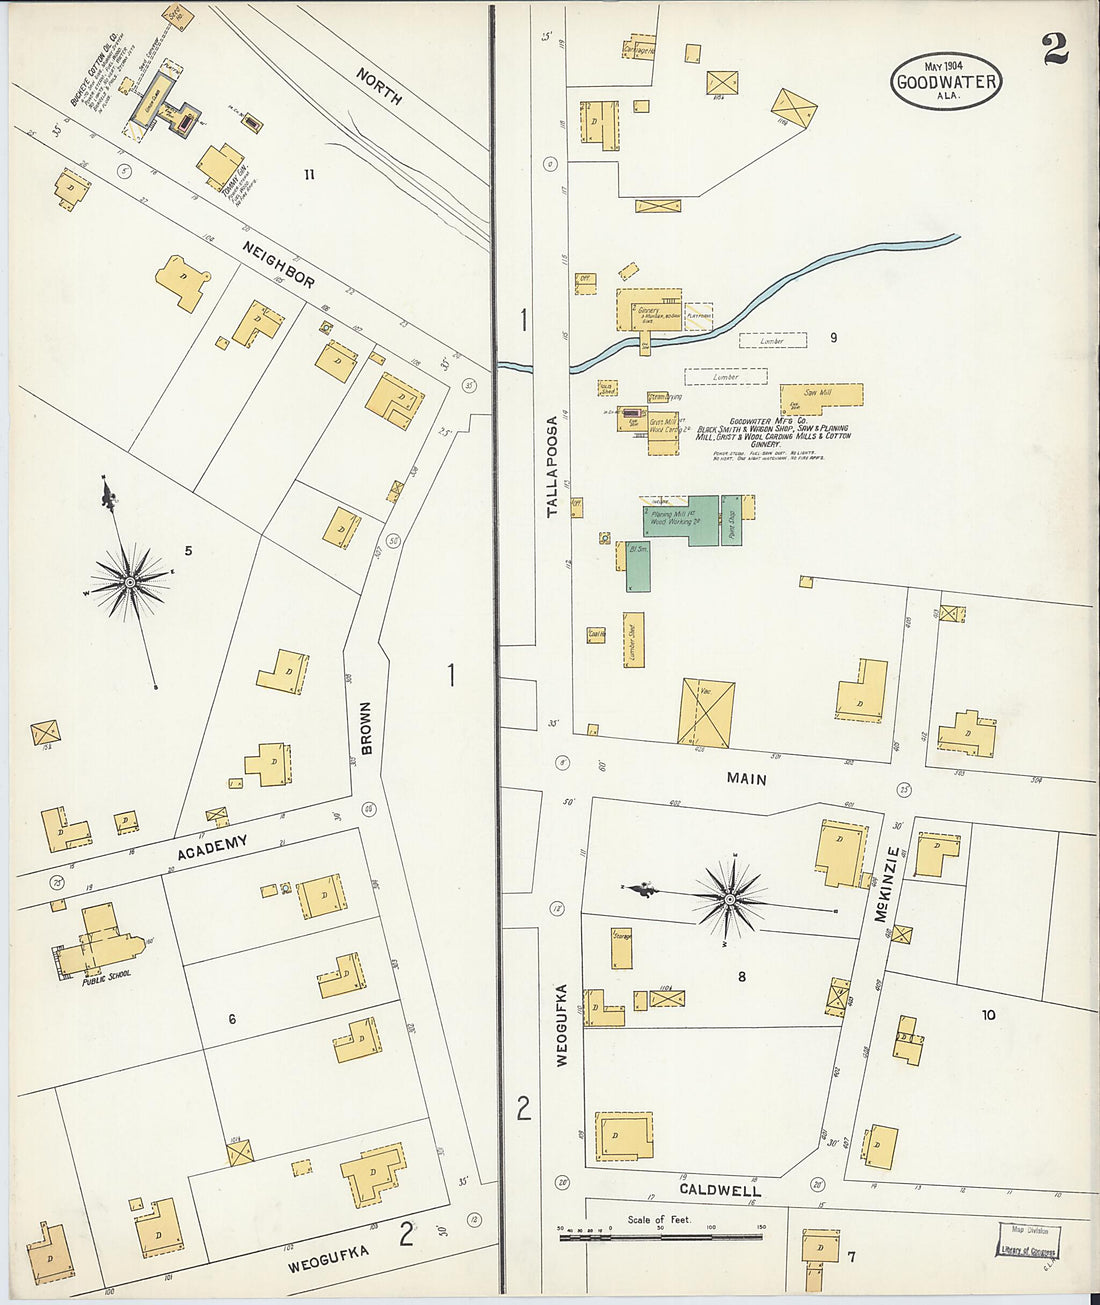 This old map of Goodwater, Coosa County, Alabama was created by Sanborn Map Company in 1904